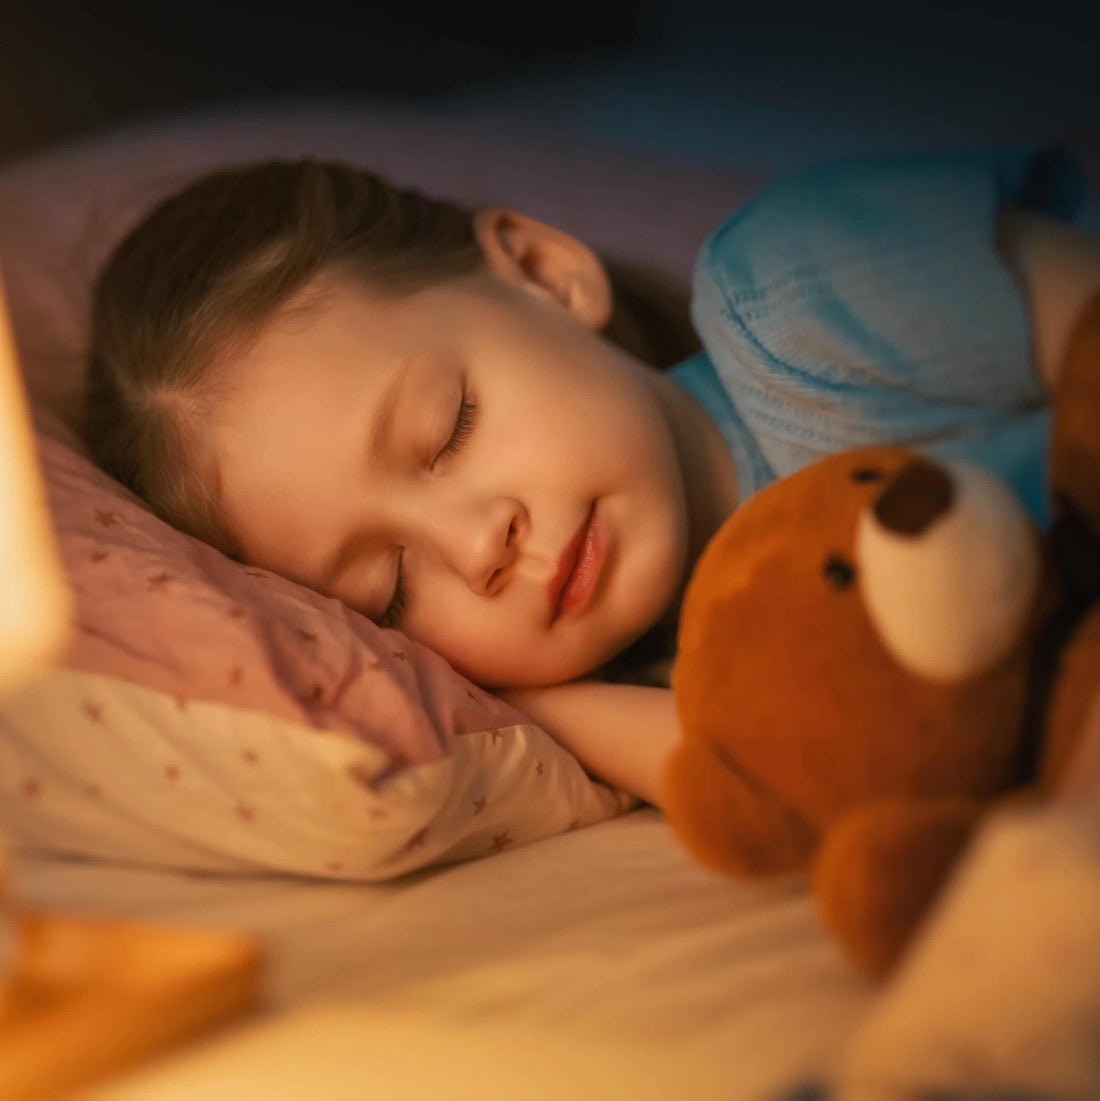 Young child soundly asleep while cuddling with toy bear.